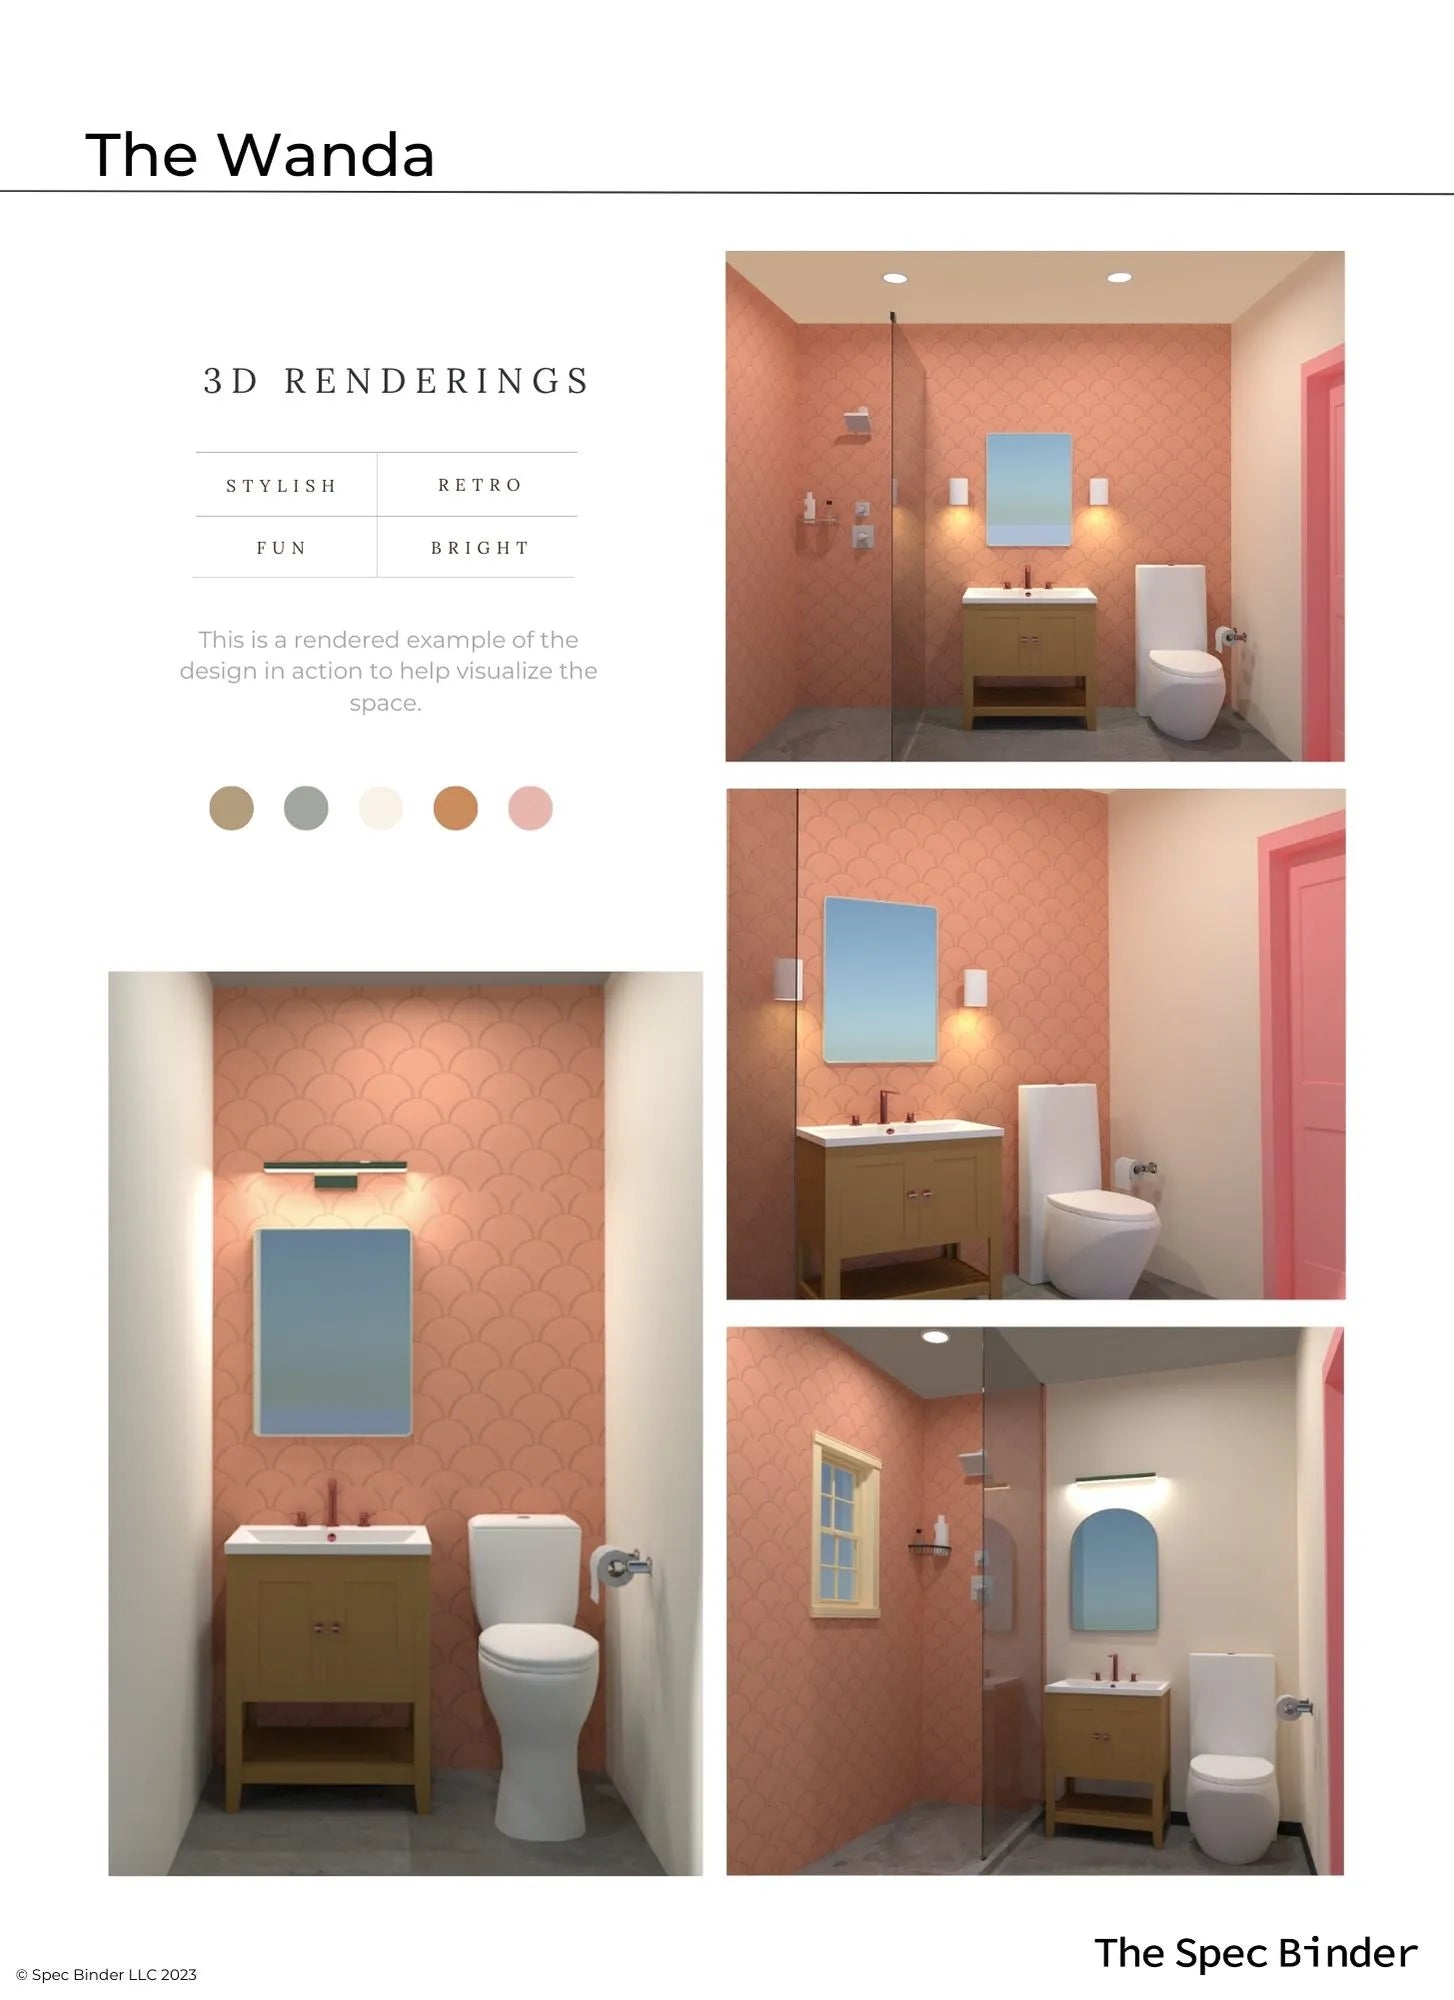 See photos of The Wanda paint colors in different spaces.The Wanda Full Bath reference images, paint samples, color swatches, and design elements. The Wanda bathroom design is Stylish, Retro, Fun, and Bright. The Wanda room design includes 3D renderings, mood boards, color and finish palettes, paint schedules, tile schedules, design brief, product selections, an editable budget document, and a link for one-on-one phone support with our team of professional interior designers.